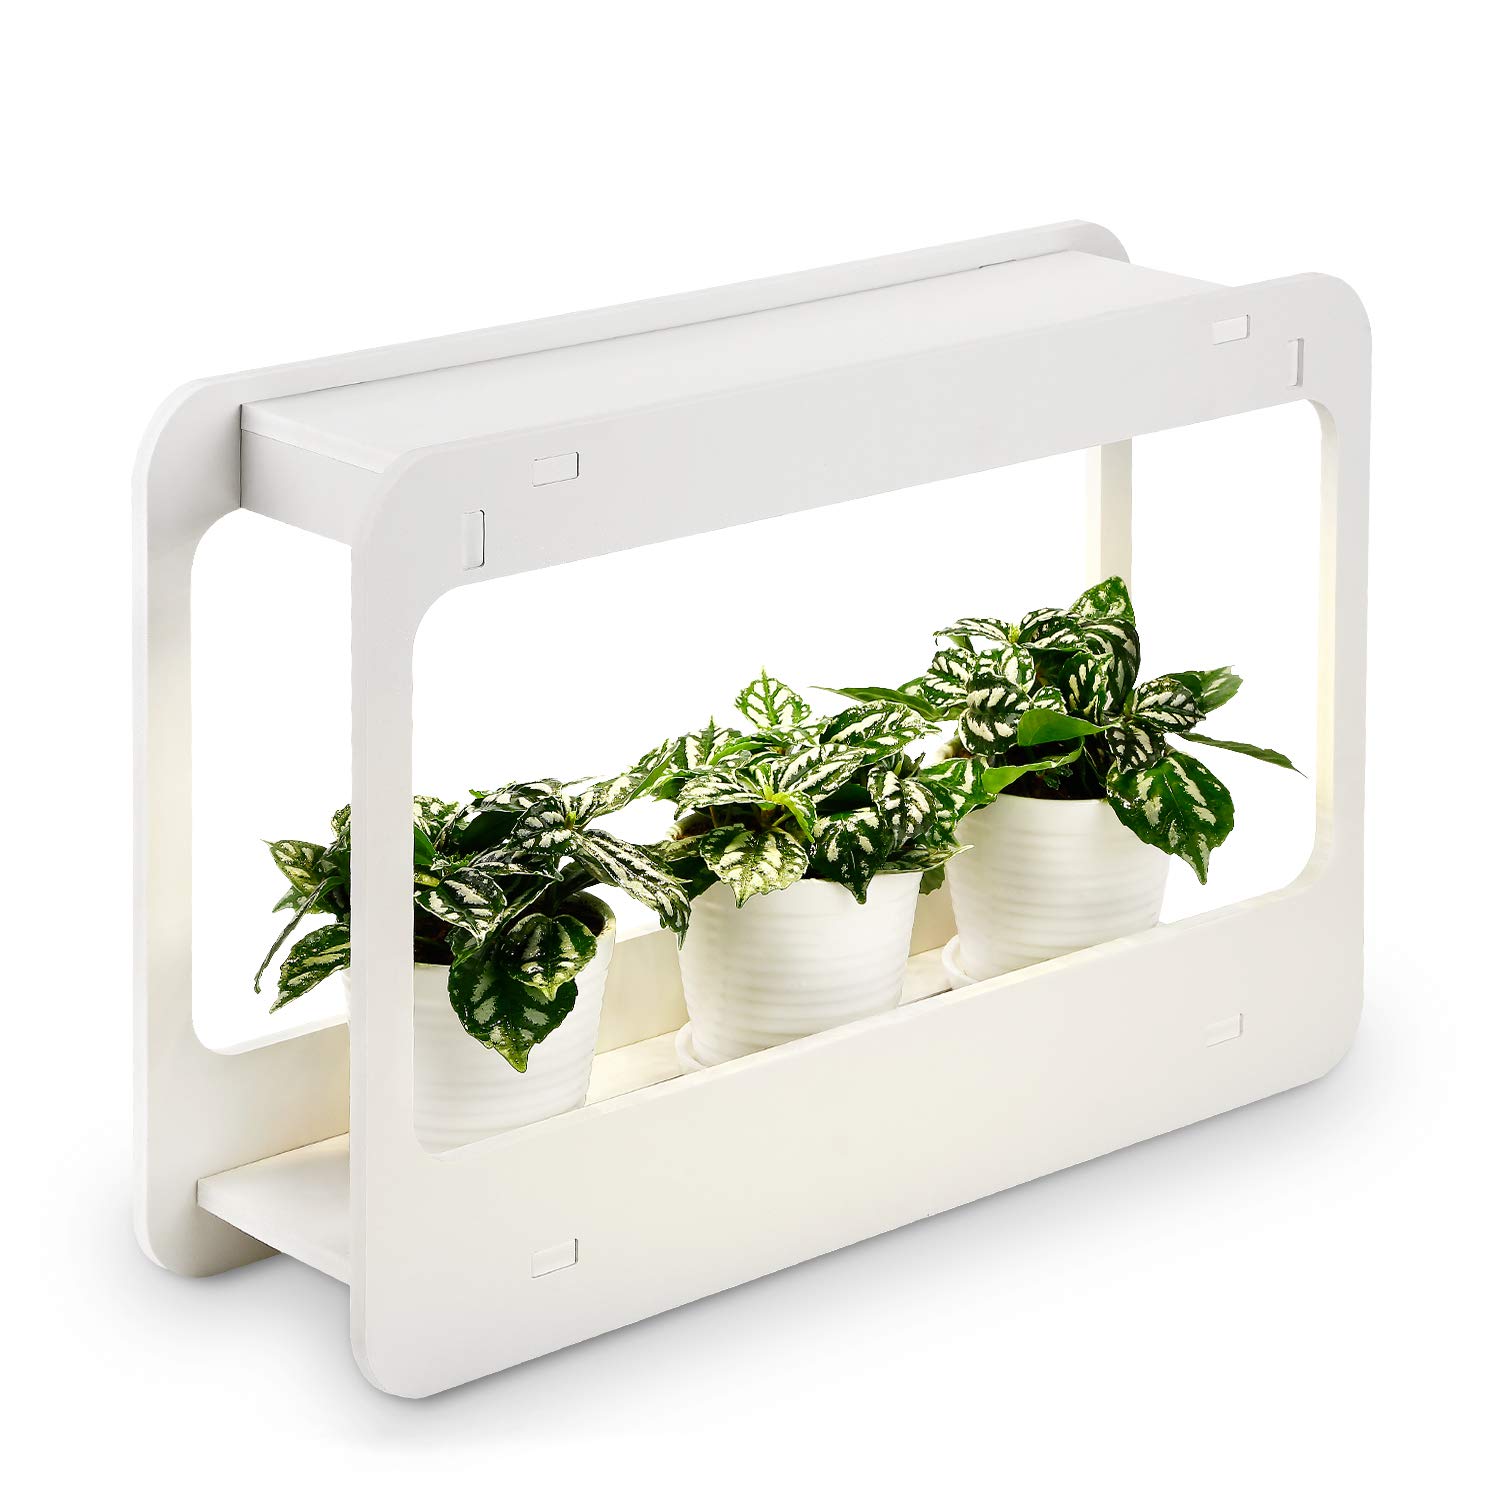 TORCHSTAR Plant Grow LED Light Kit, Indoor Herb Garden with Timer Function,  24V Low Voltage, Indoor Harvest Elite for Gourmet or Plant Enthusiasts,